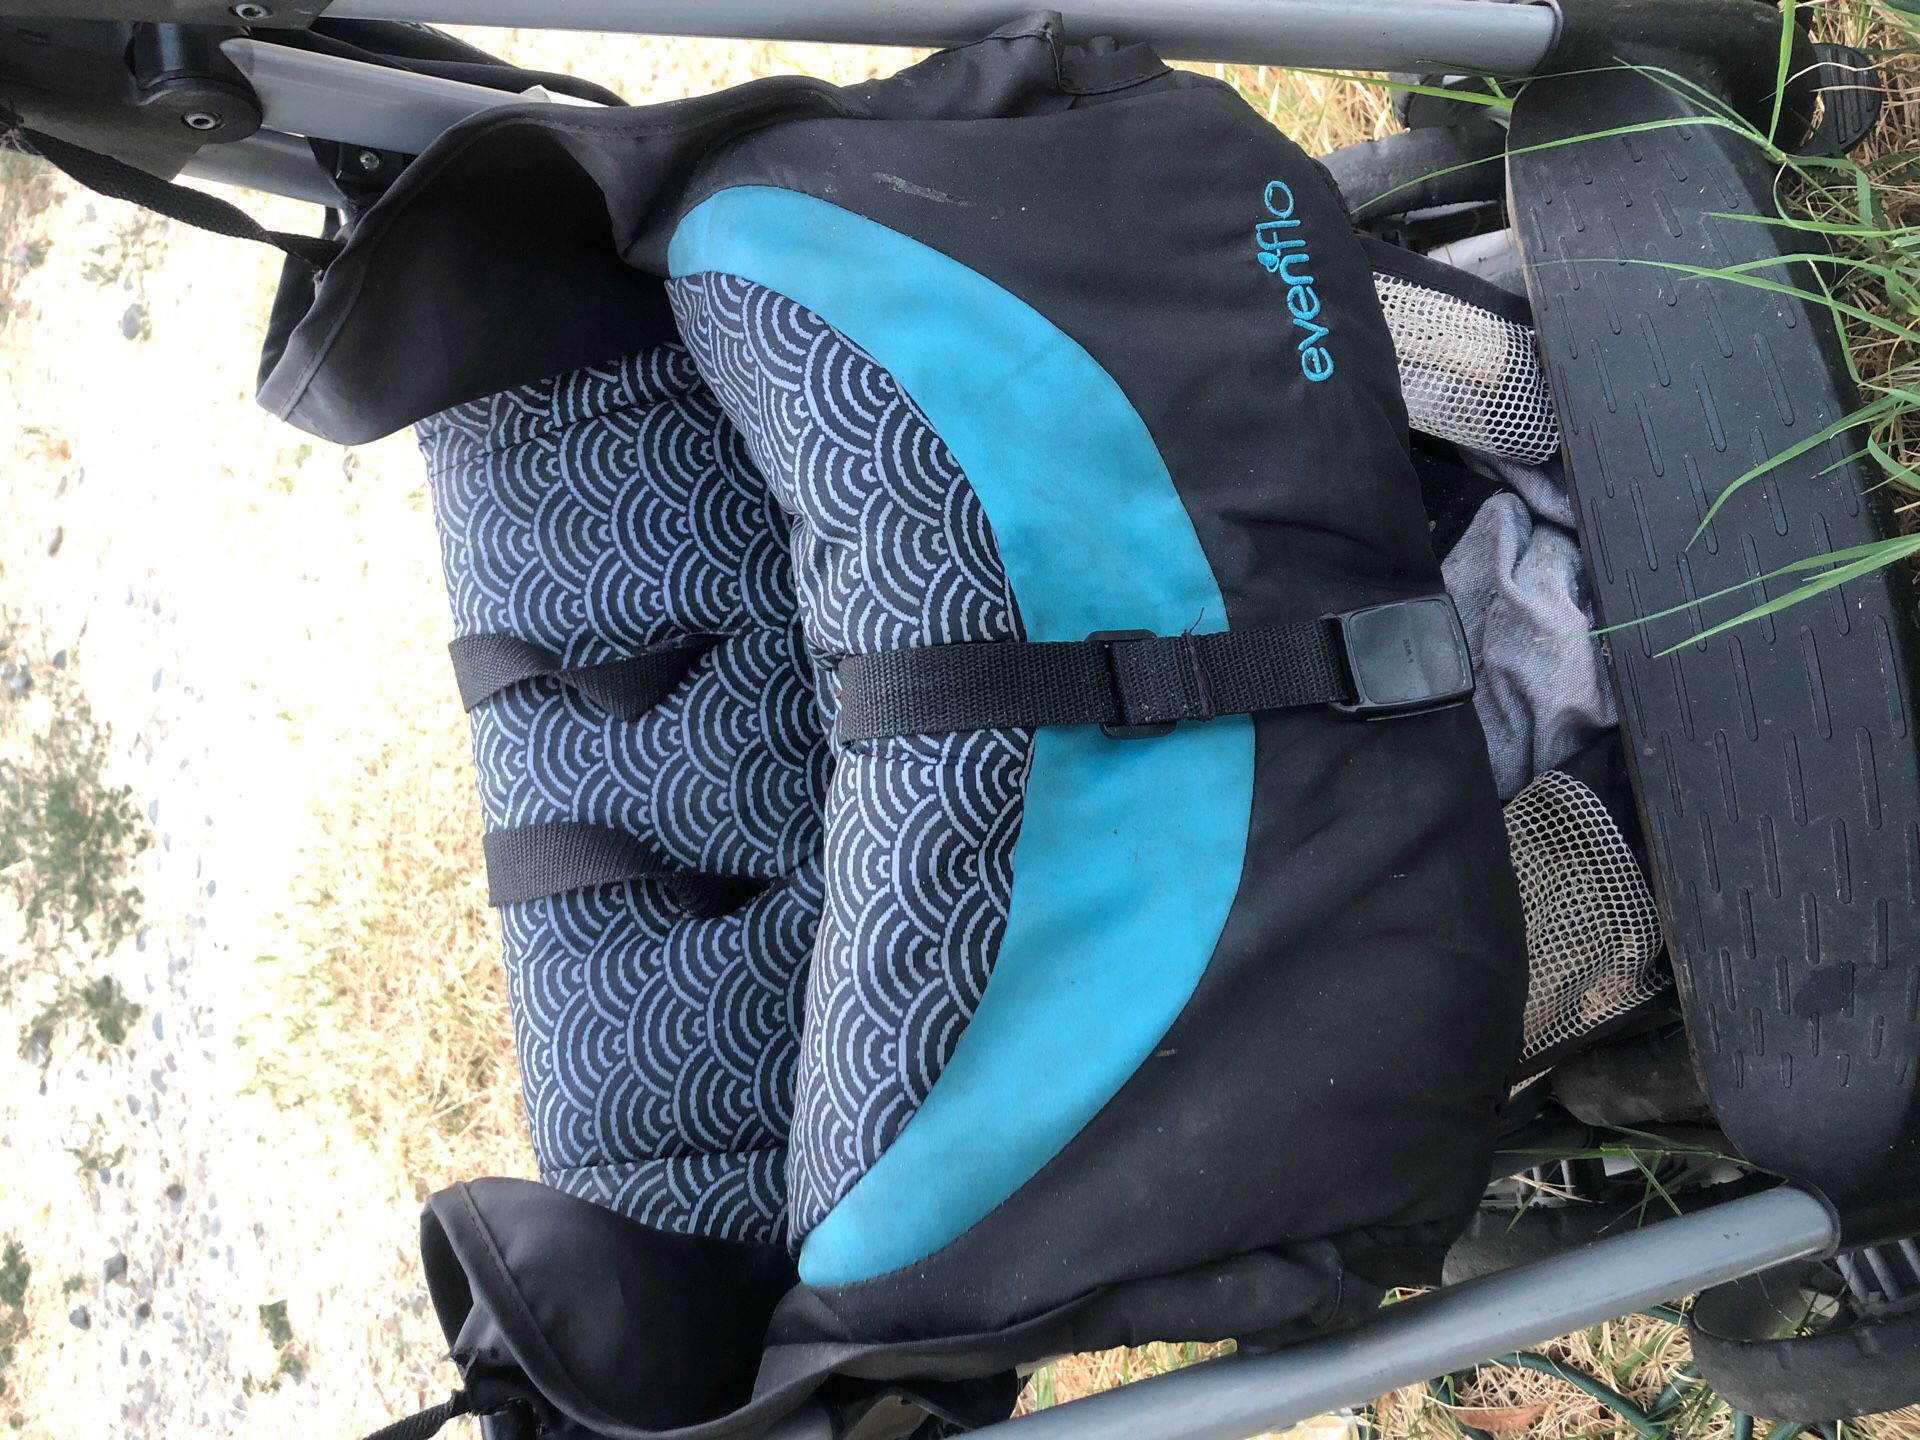 Free stroller and car seat